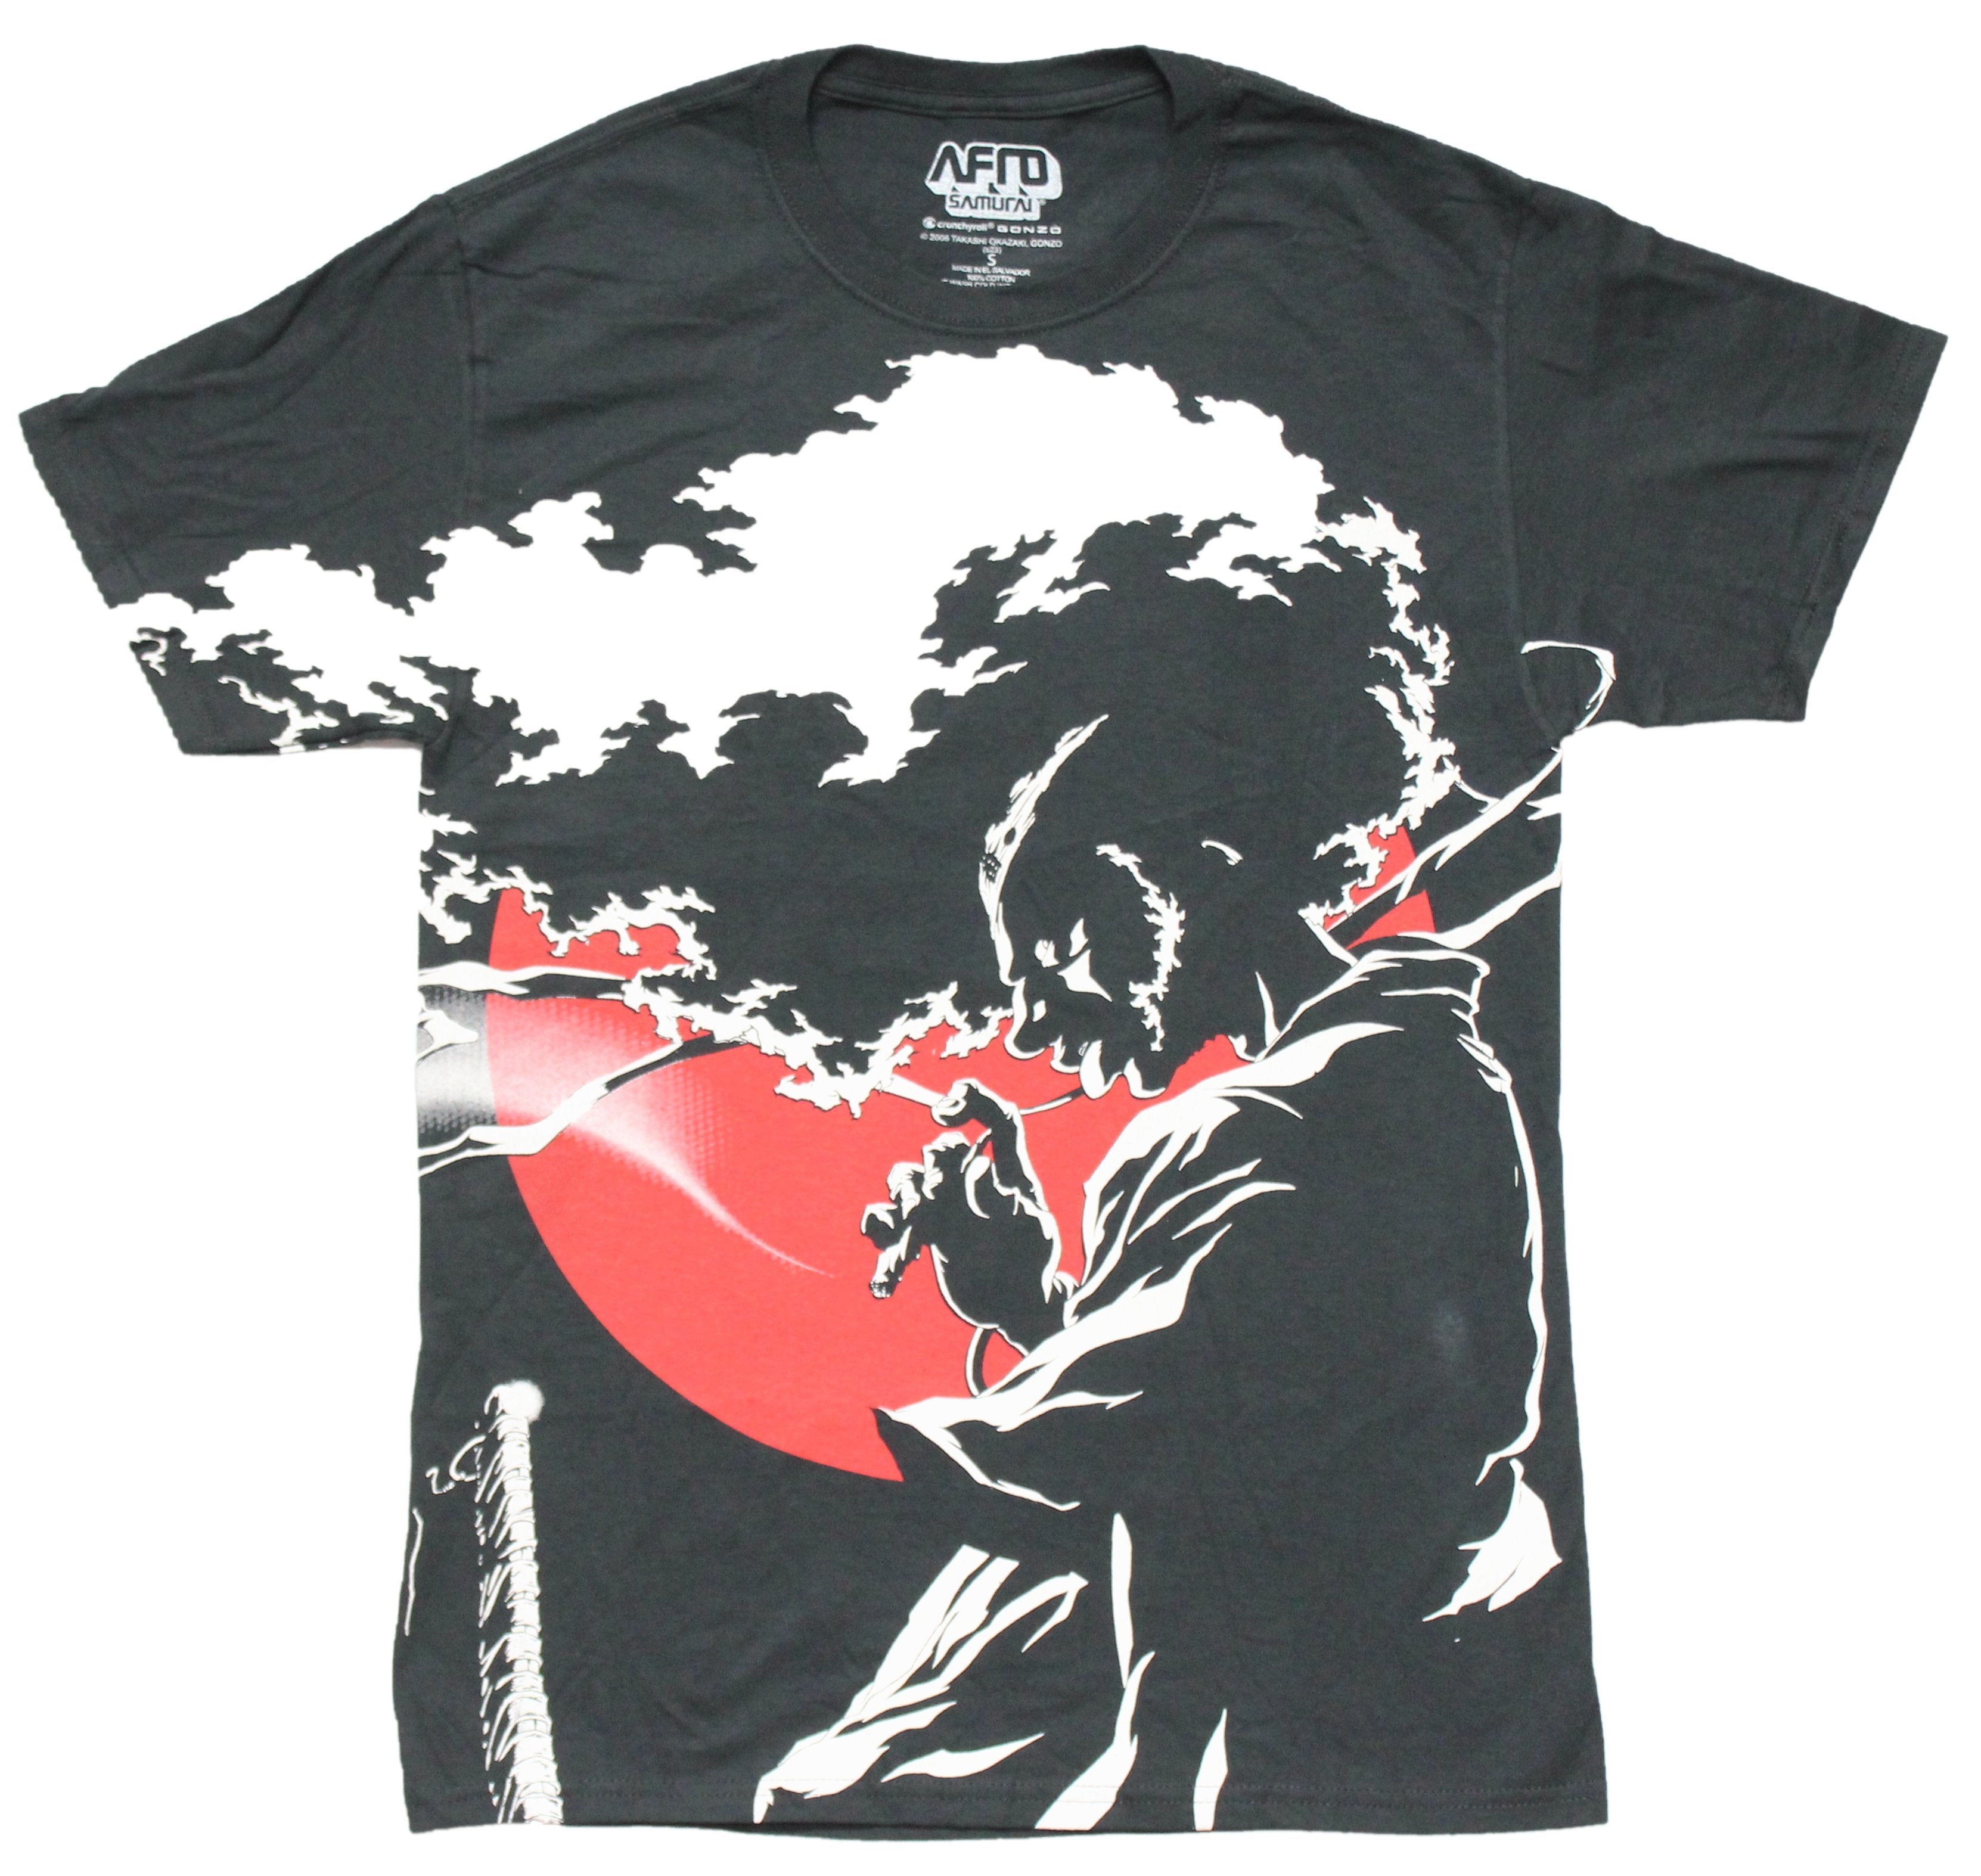 Afro Samurai Graphic Mens T-Shirt  "Nothing Personal" Quote on Back